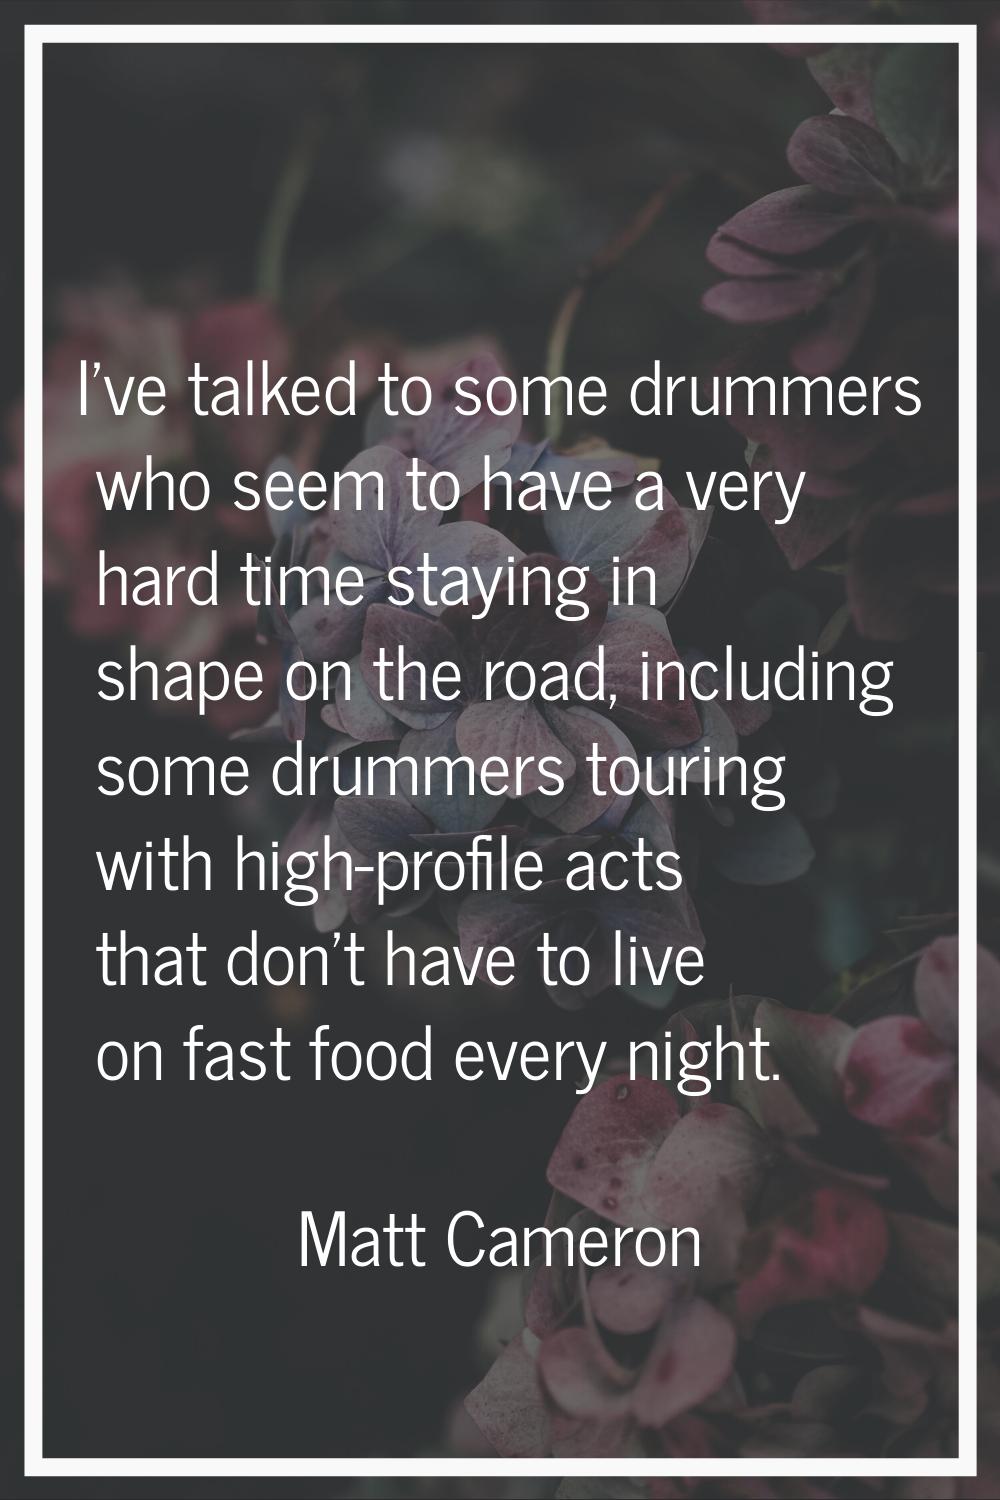 I've talked to some drummers who seem to have a very hard time staying in shape on the road, includ